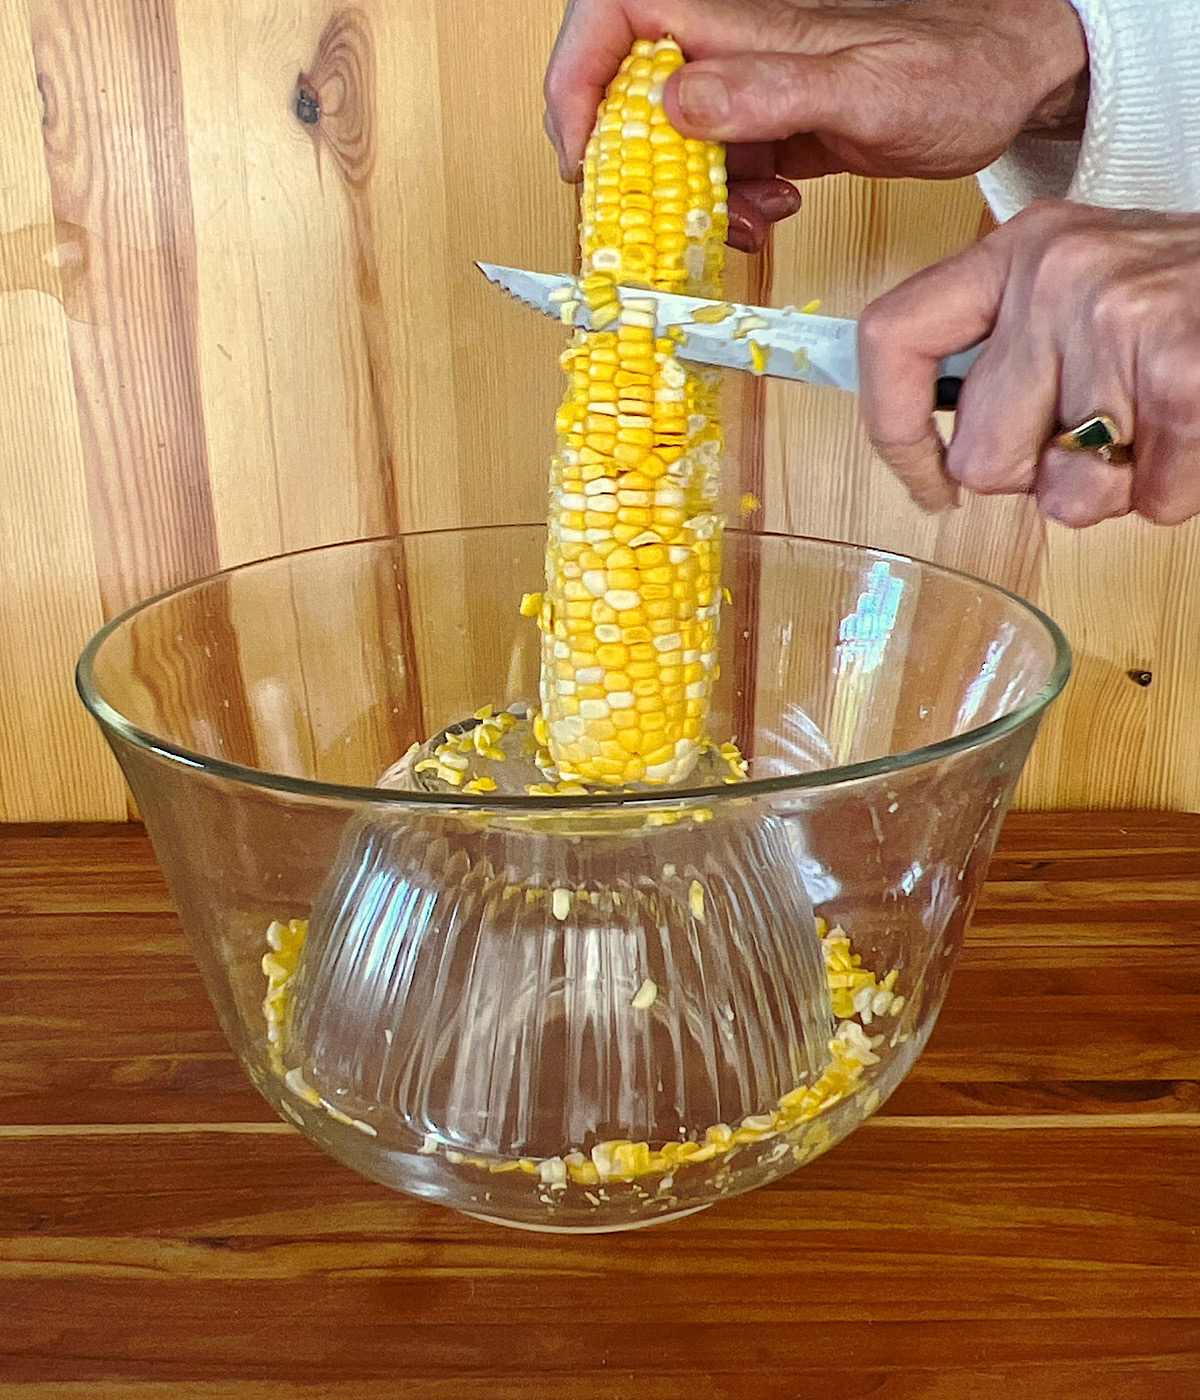 Cutting the kernels off of fresh sweet corn with a knife into a bowl.